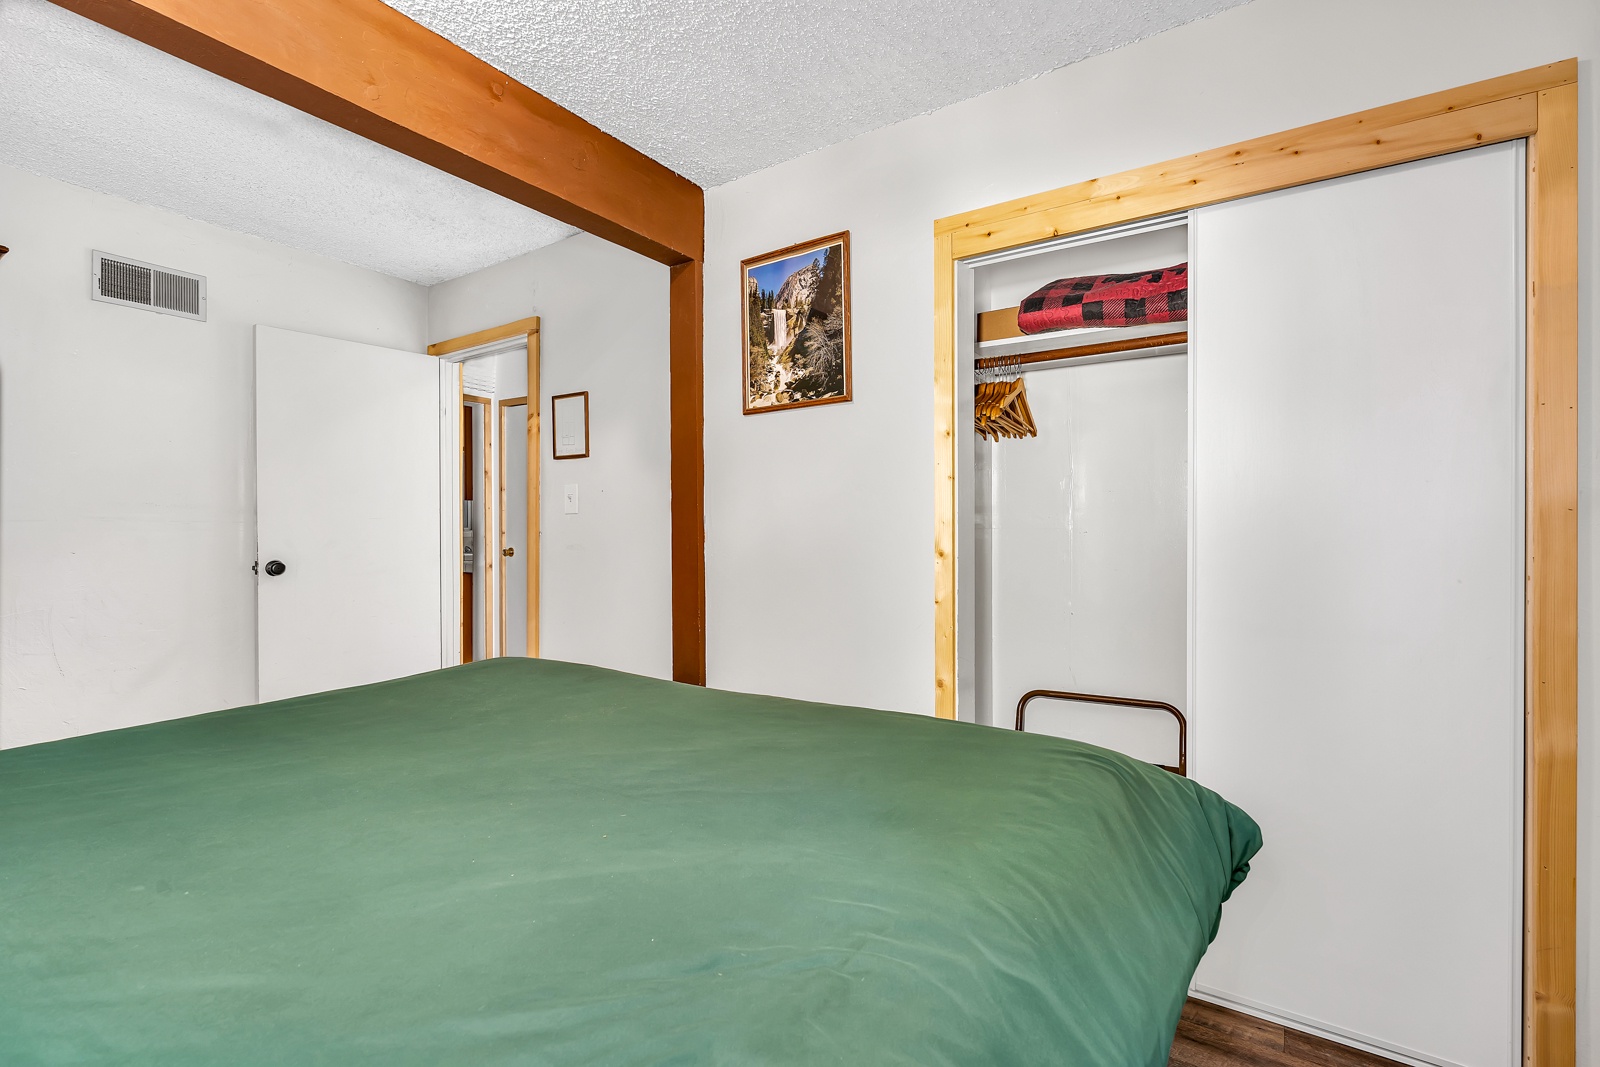 The first of three spacious bedrooms offers a plush king-sized bed